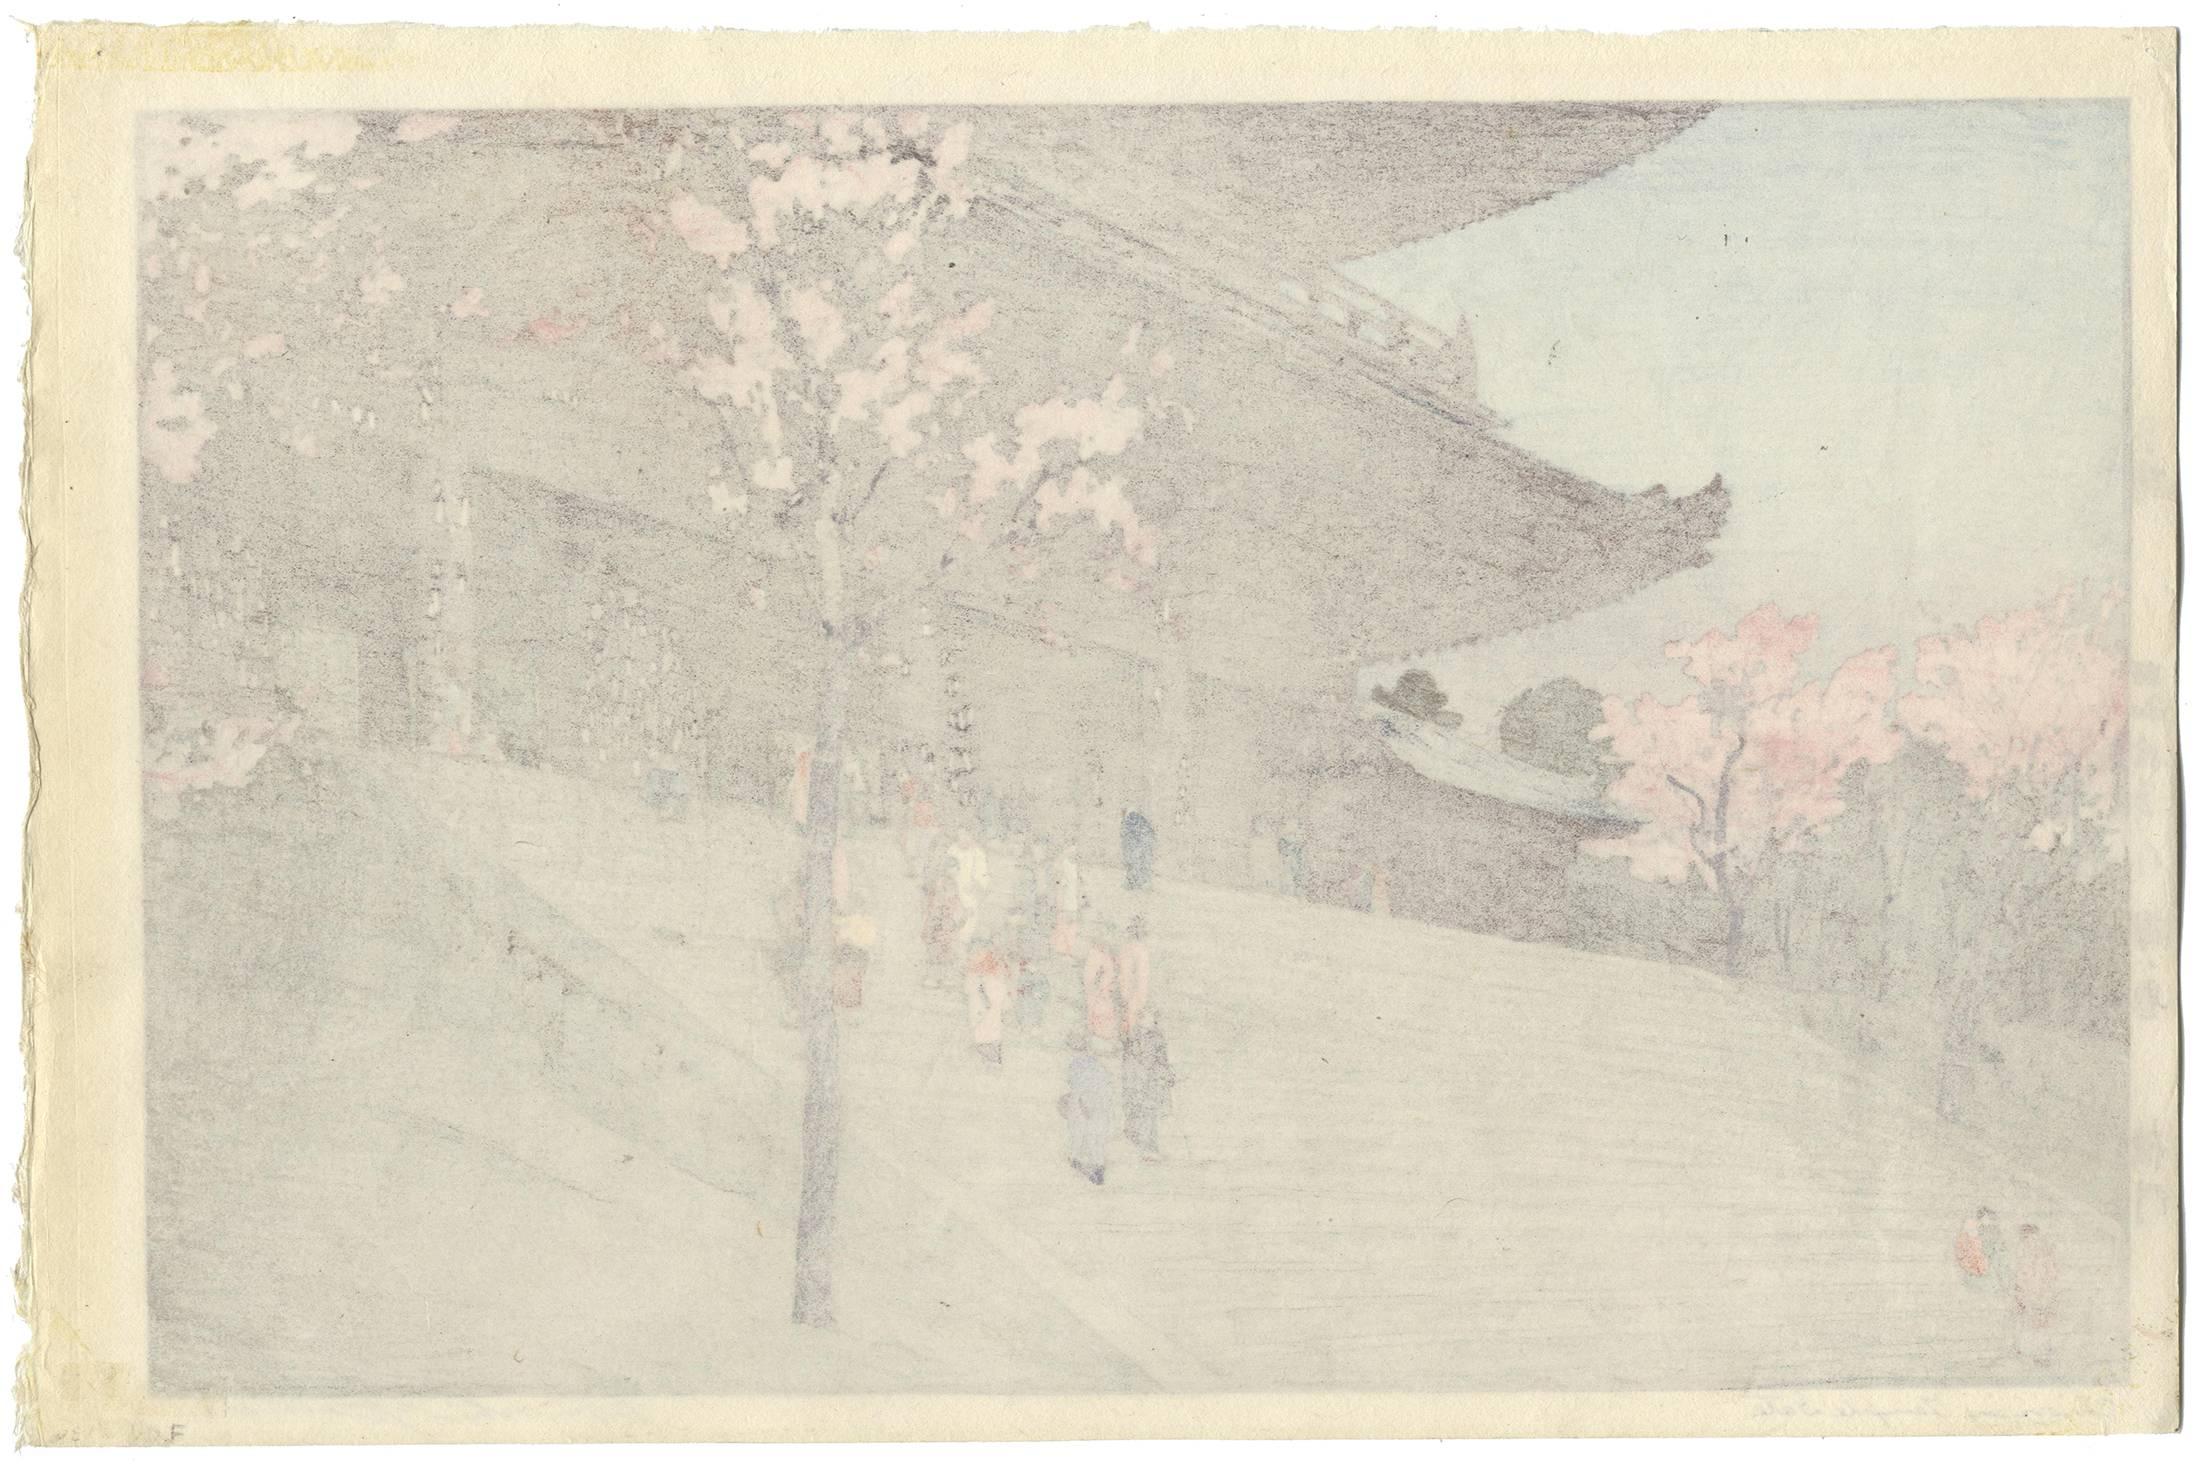 Title: The Chion'in Temple Gate
Artist: Hiroshi Yoshida
Series: Eight Scenes of Cherry Blossom
Self-published and signed by the artist in 1935

In the year of 1935, Hiroshi Yoshida depicted scenes of cherry blossom from various places of Japan and